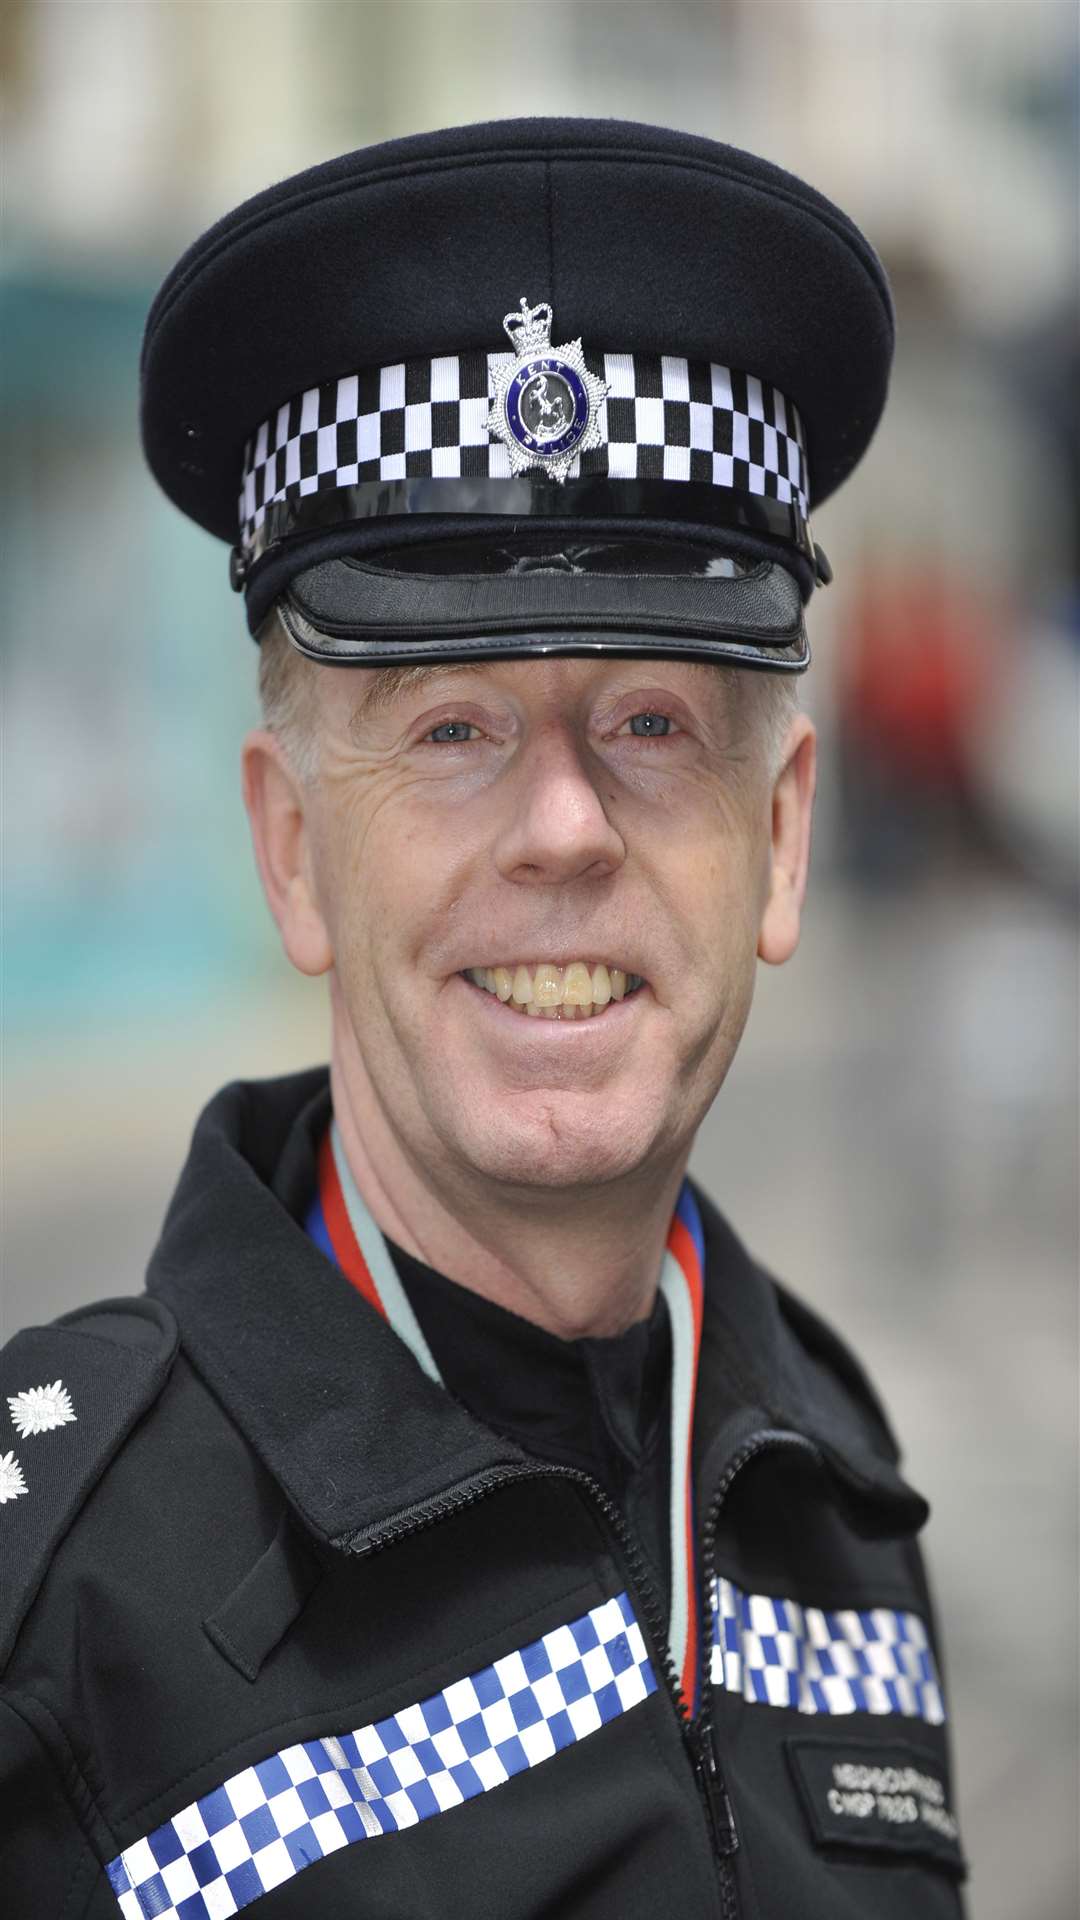 Canterbury district commander Ch Insp Mark Arnold